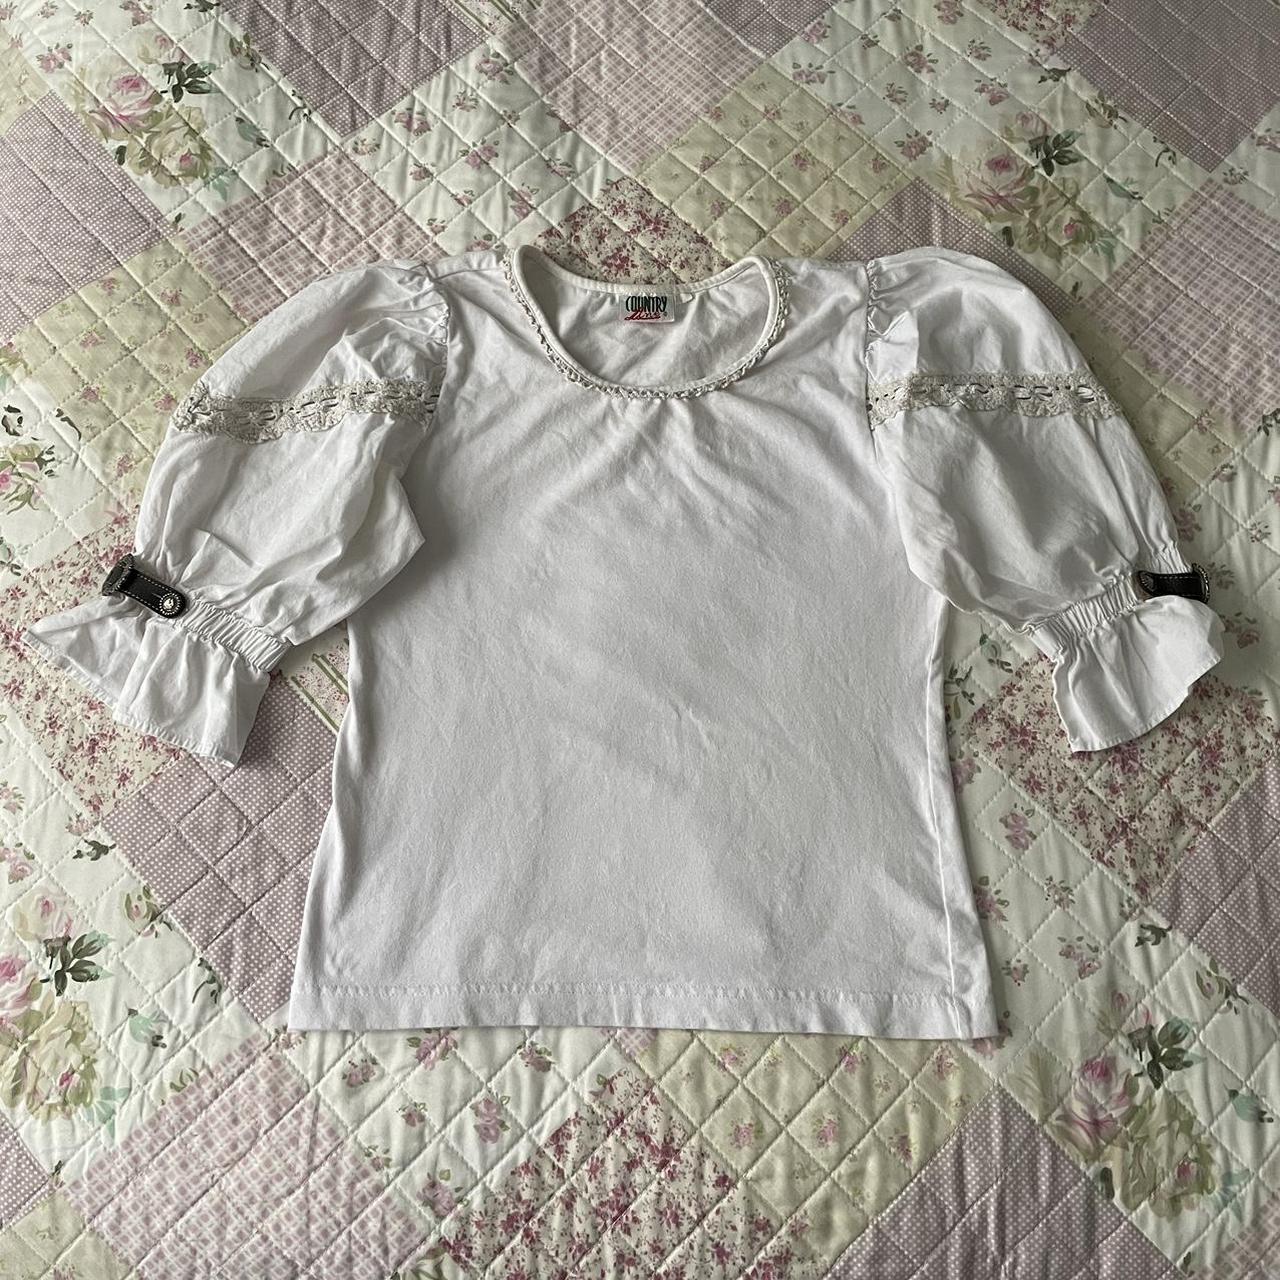 Women's White and Silver Top | Depop